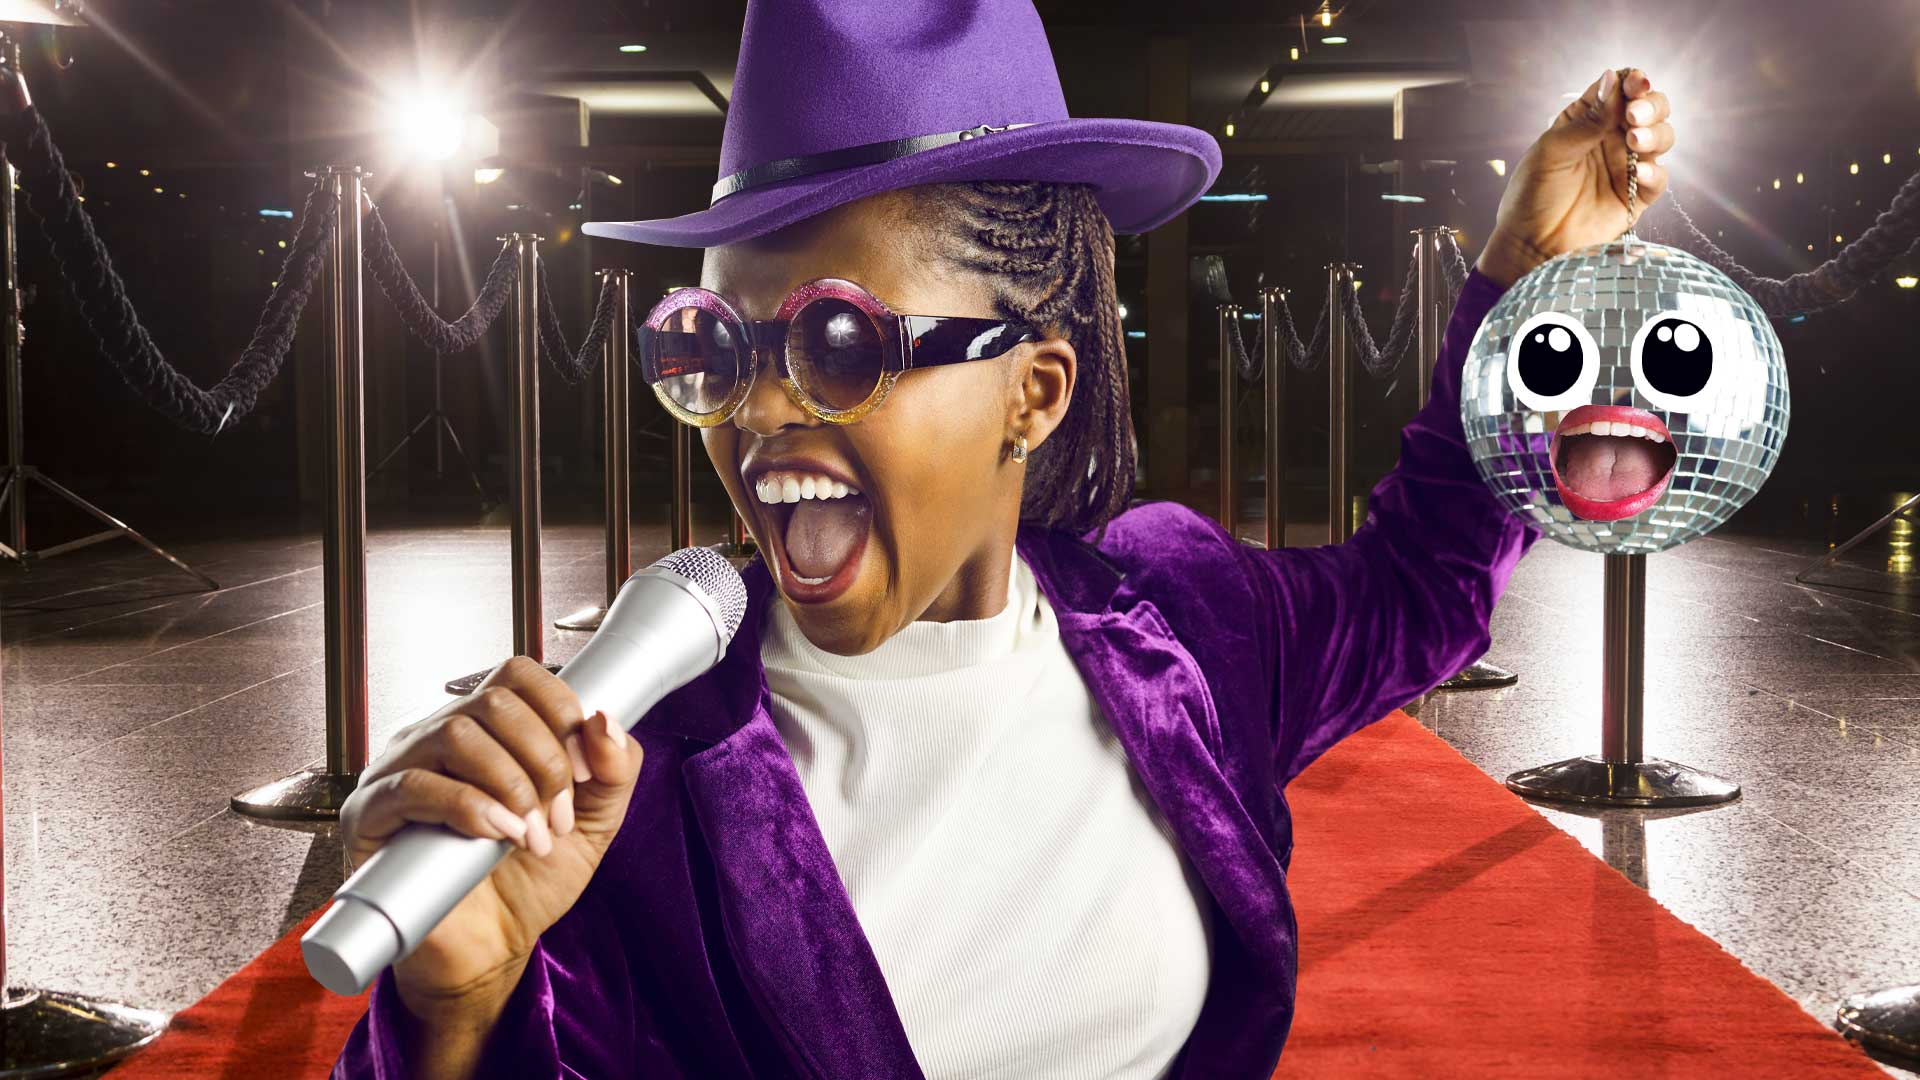 A woman in a purple outfit singing on the red carpet 